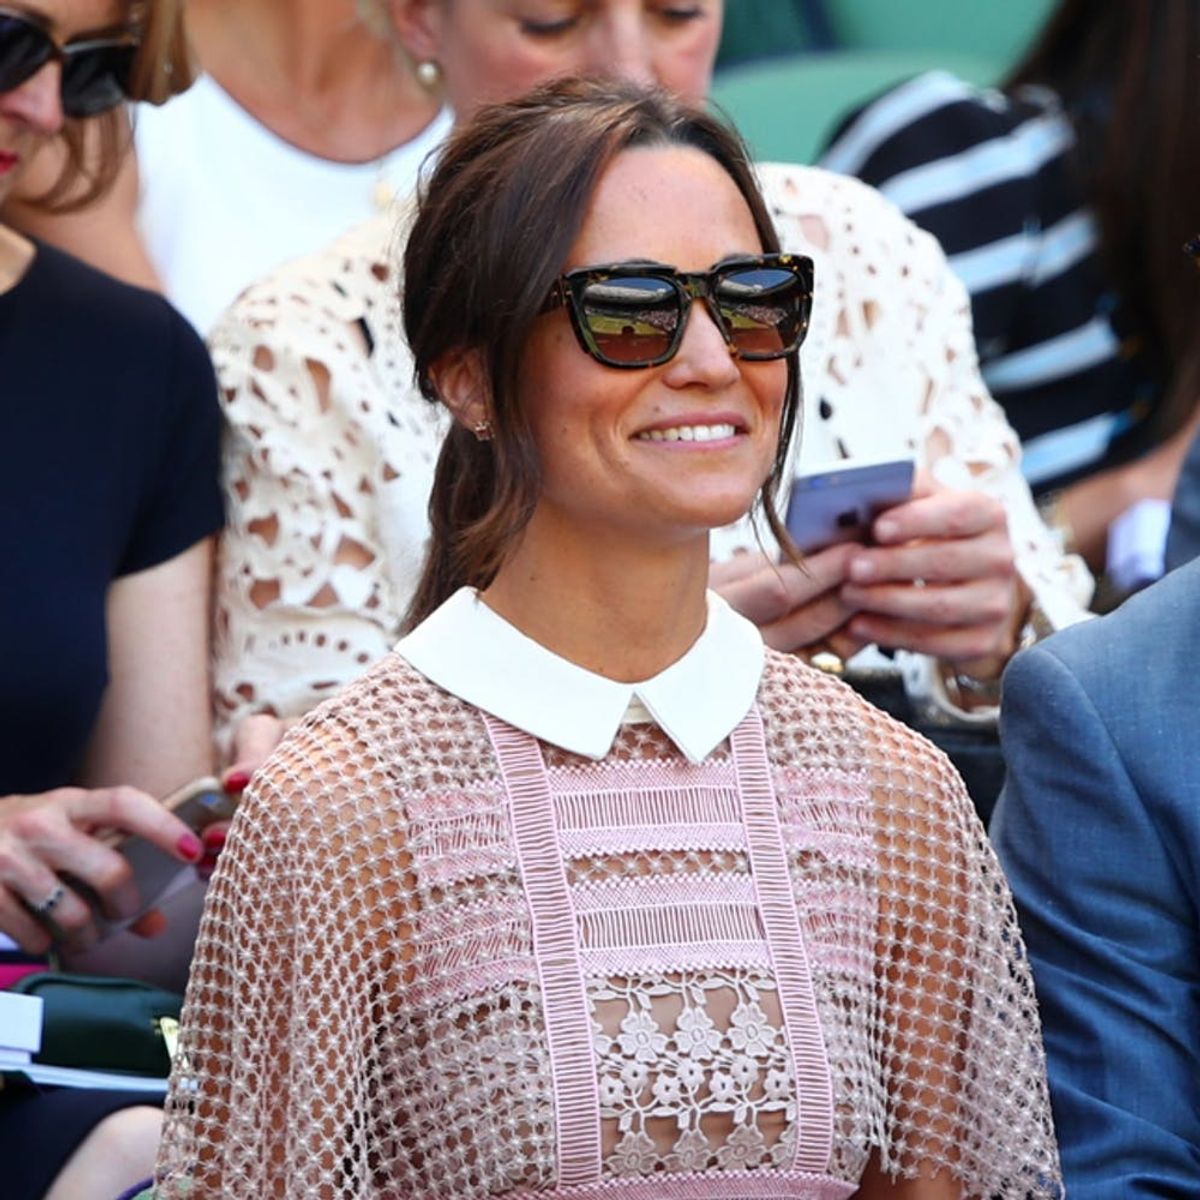 Pippa Middleton Wows at Wimbledon in Sheer Lace Dress